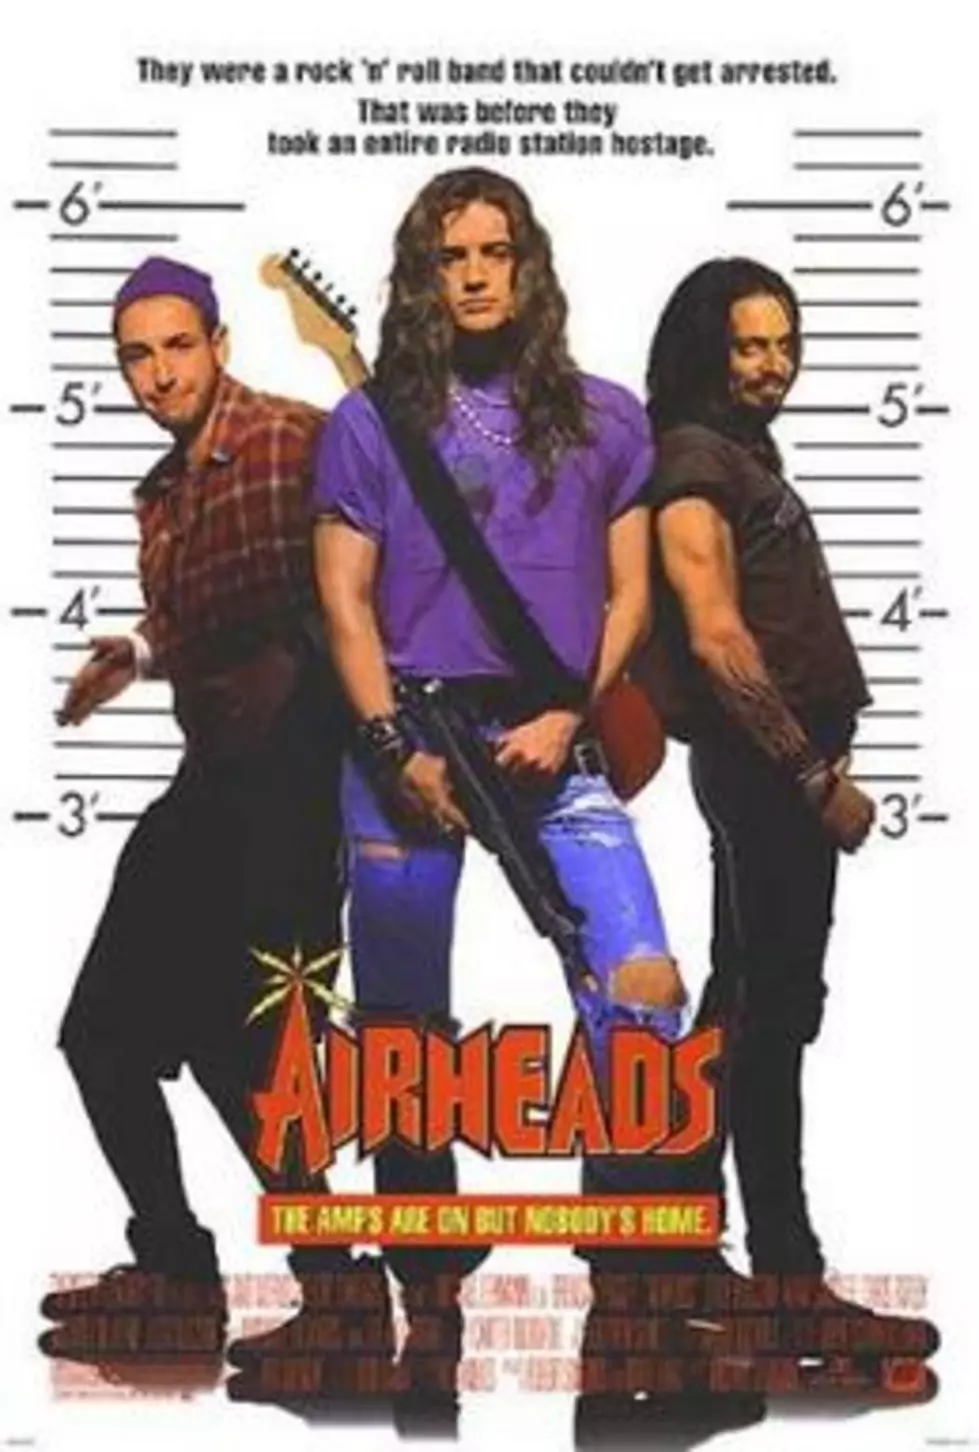 25 Years Ago Today: AIRHEADS was Released in Theatres